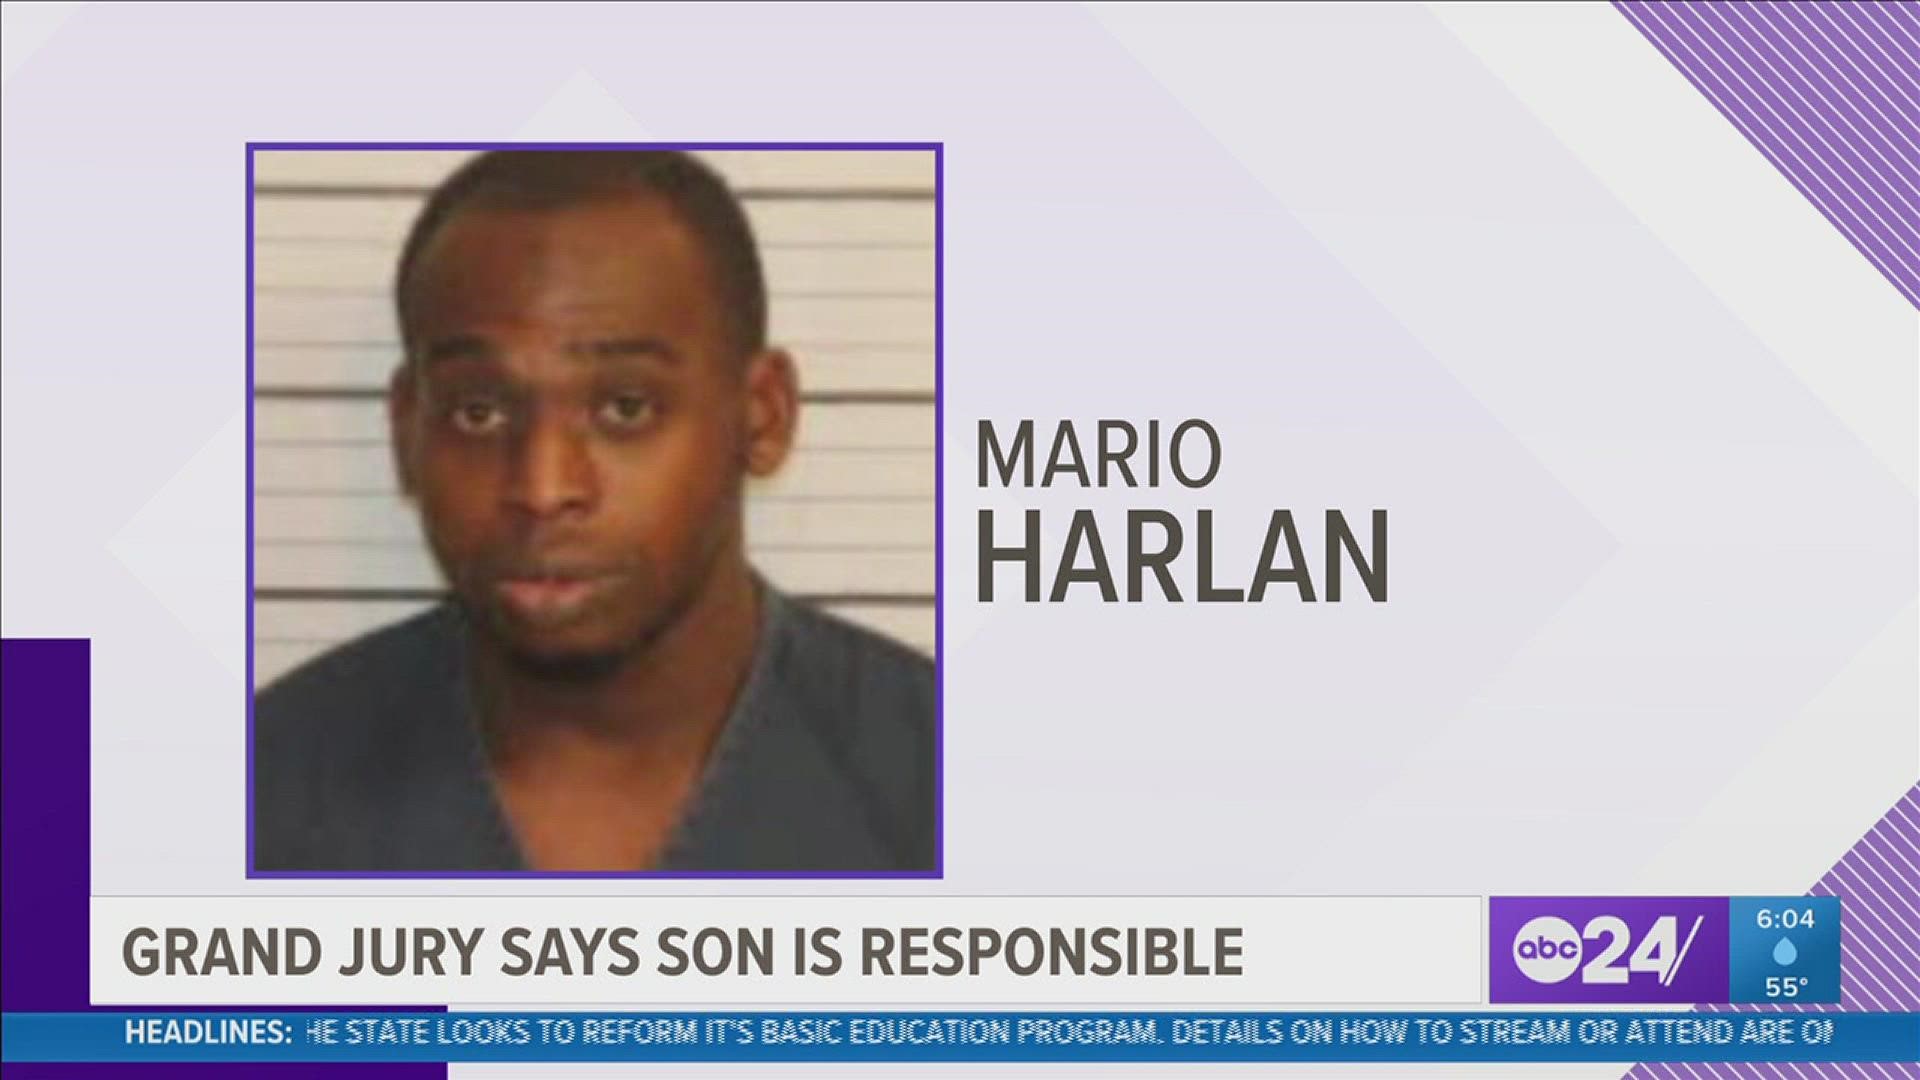 Mario Harlan was indicted for first-degree murder in the death of his father Patrick Harlan.